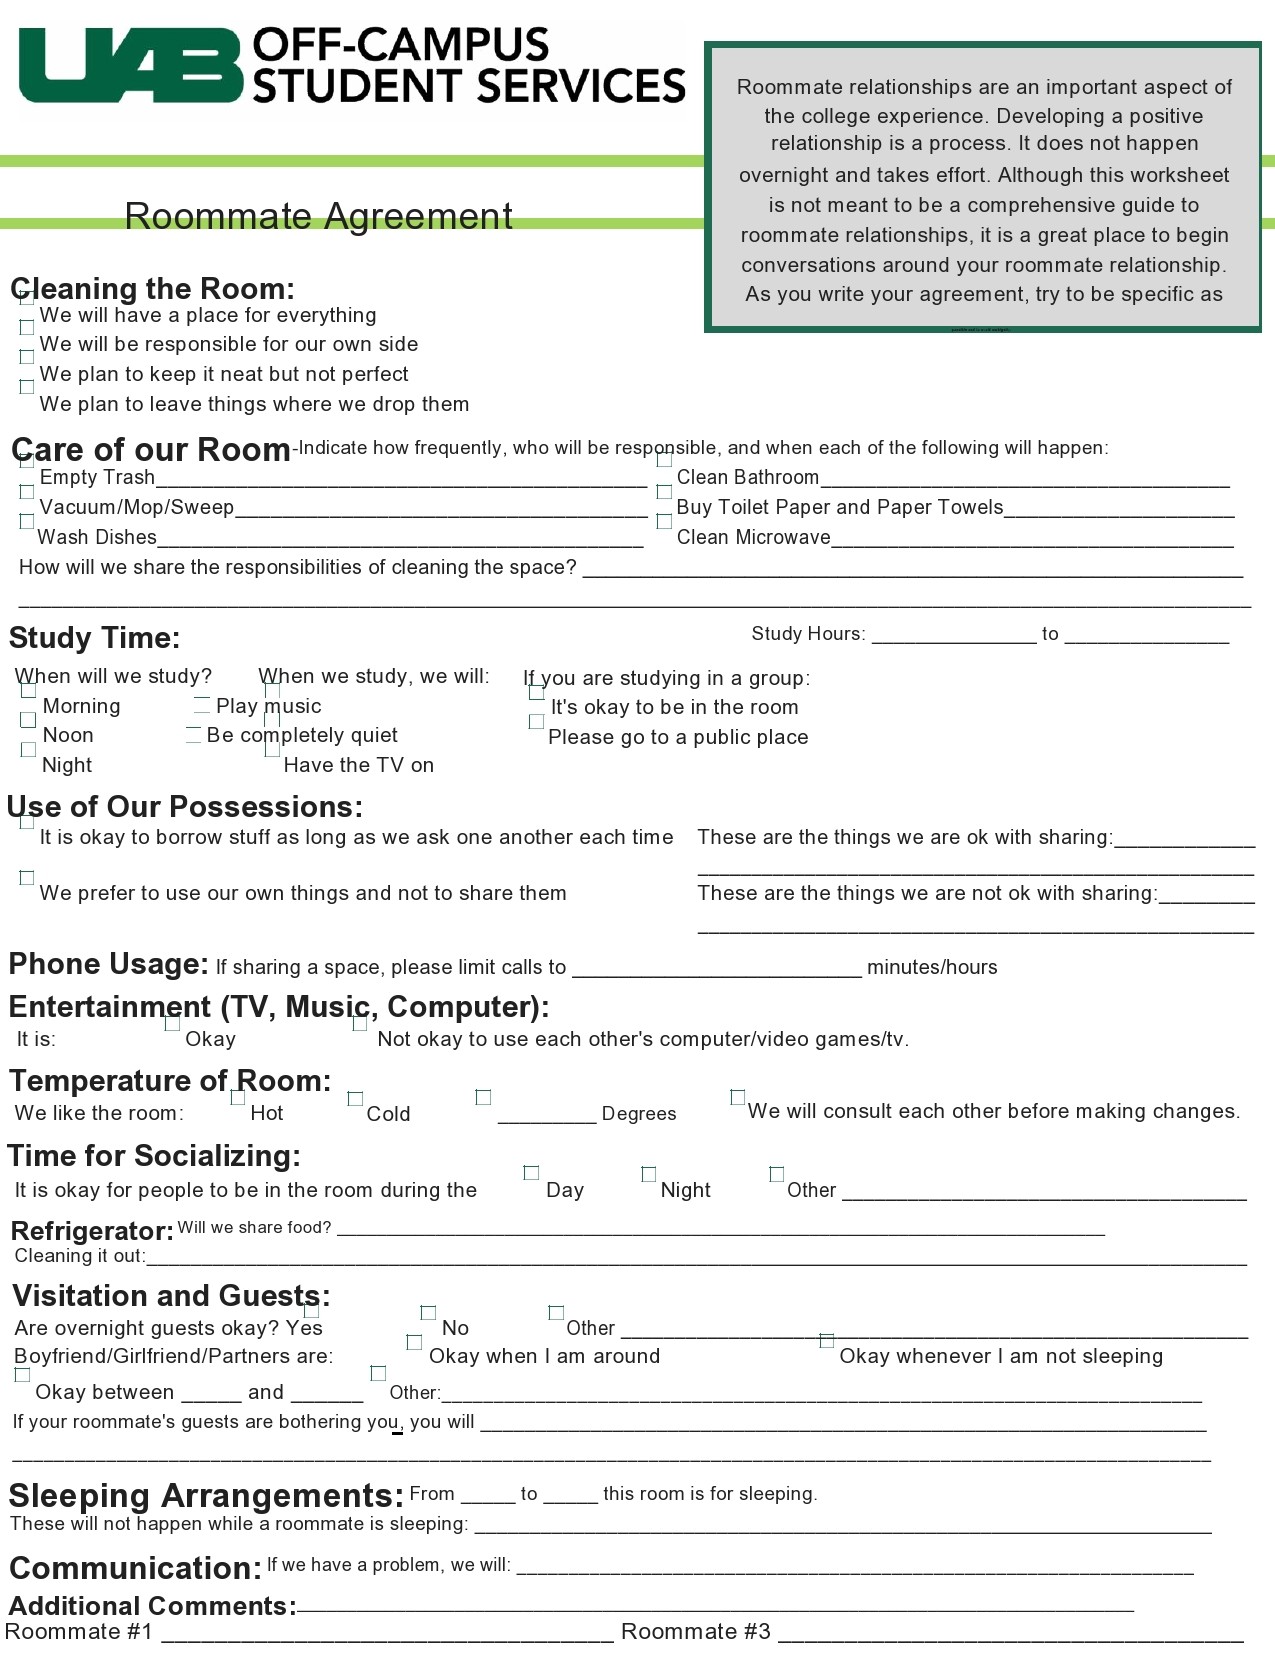 Free roommate agreement template 27